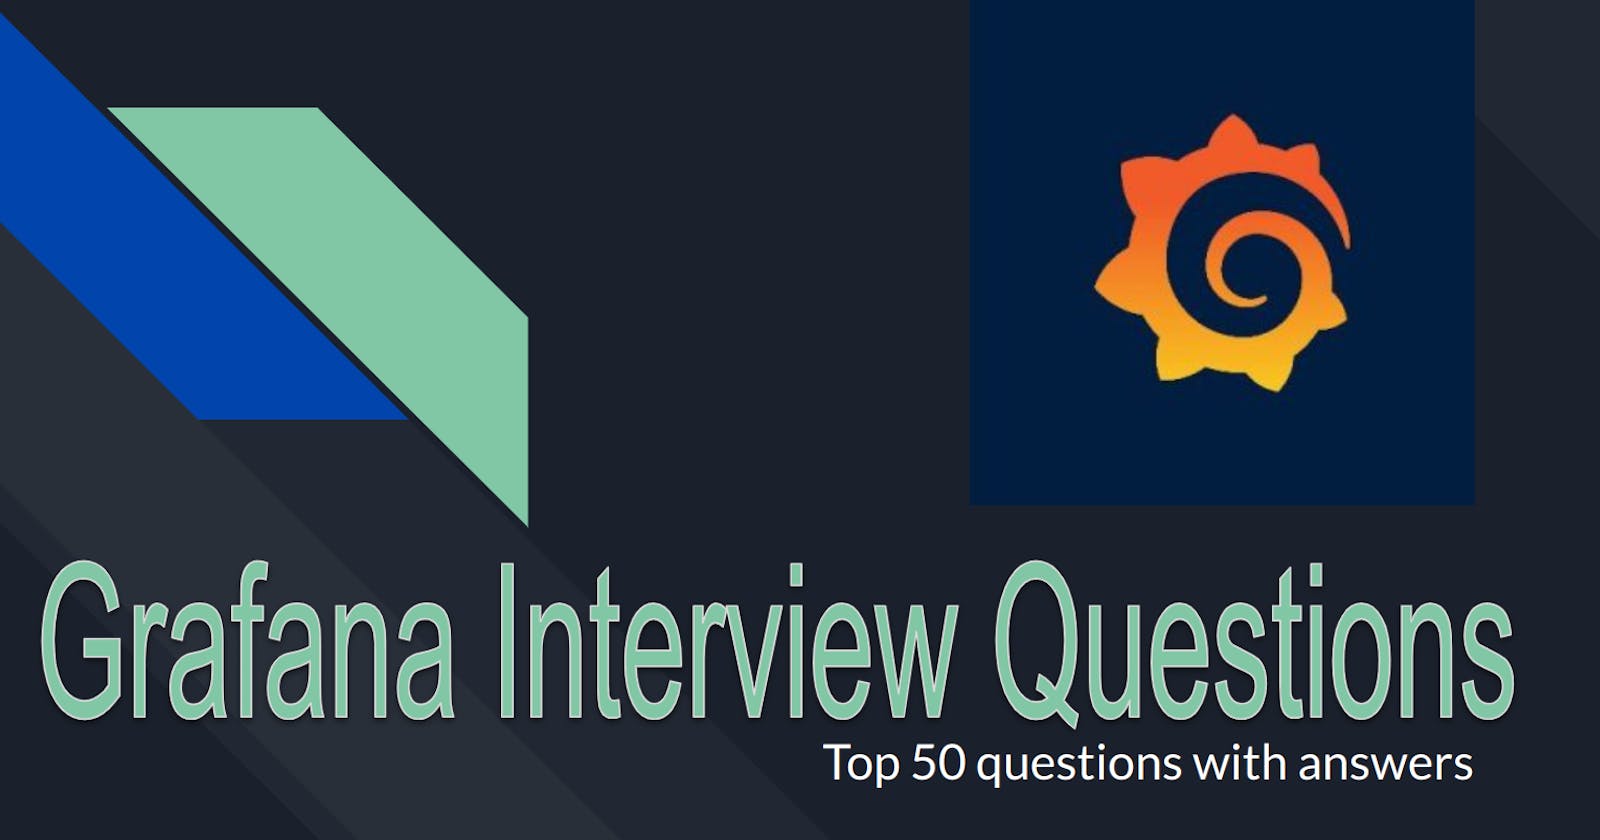 Day 88: Grafana Interview Questions